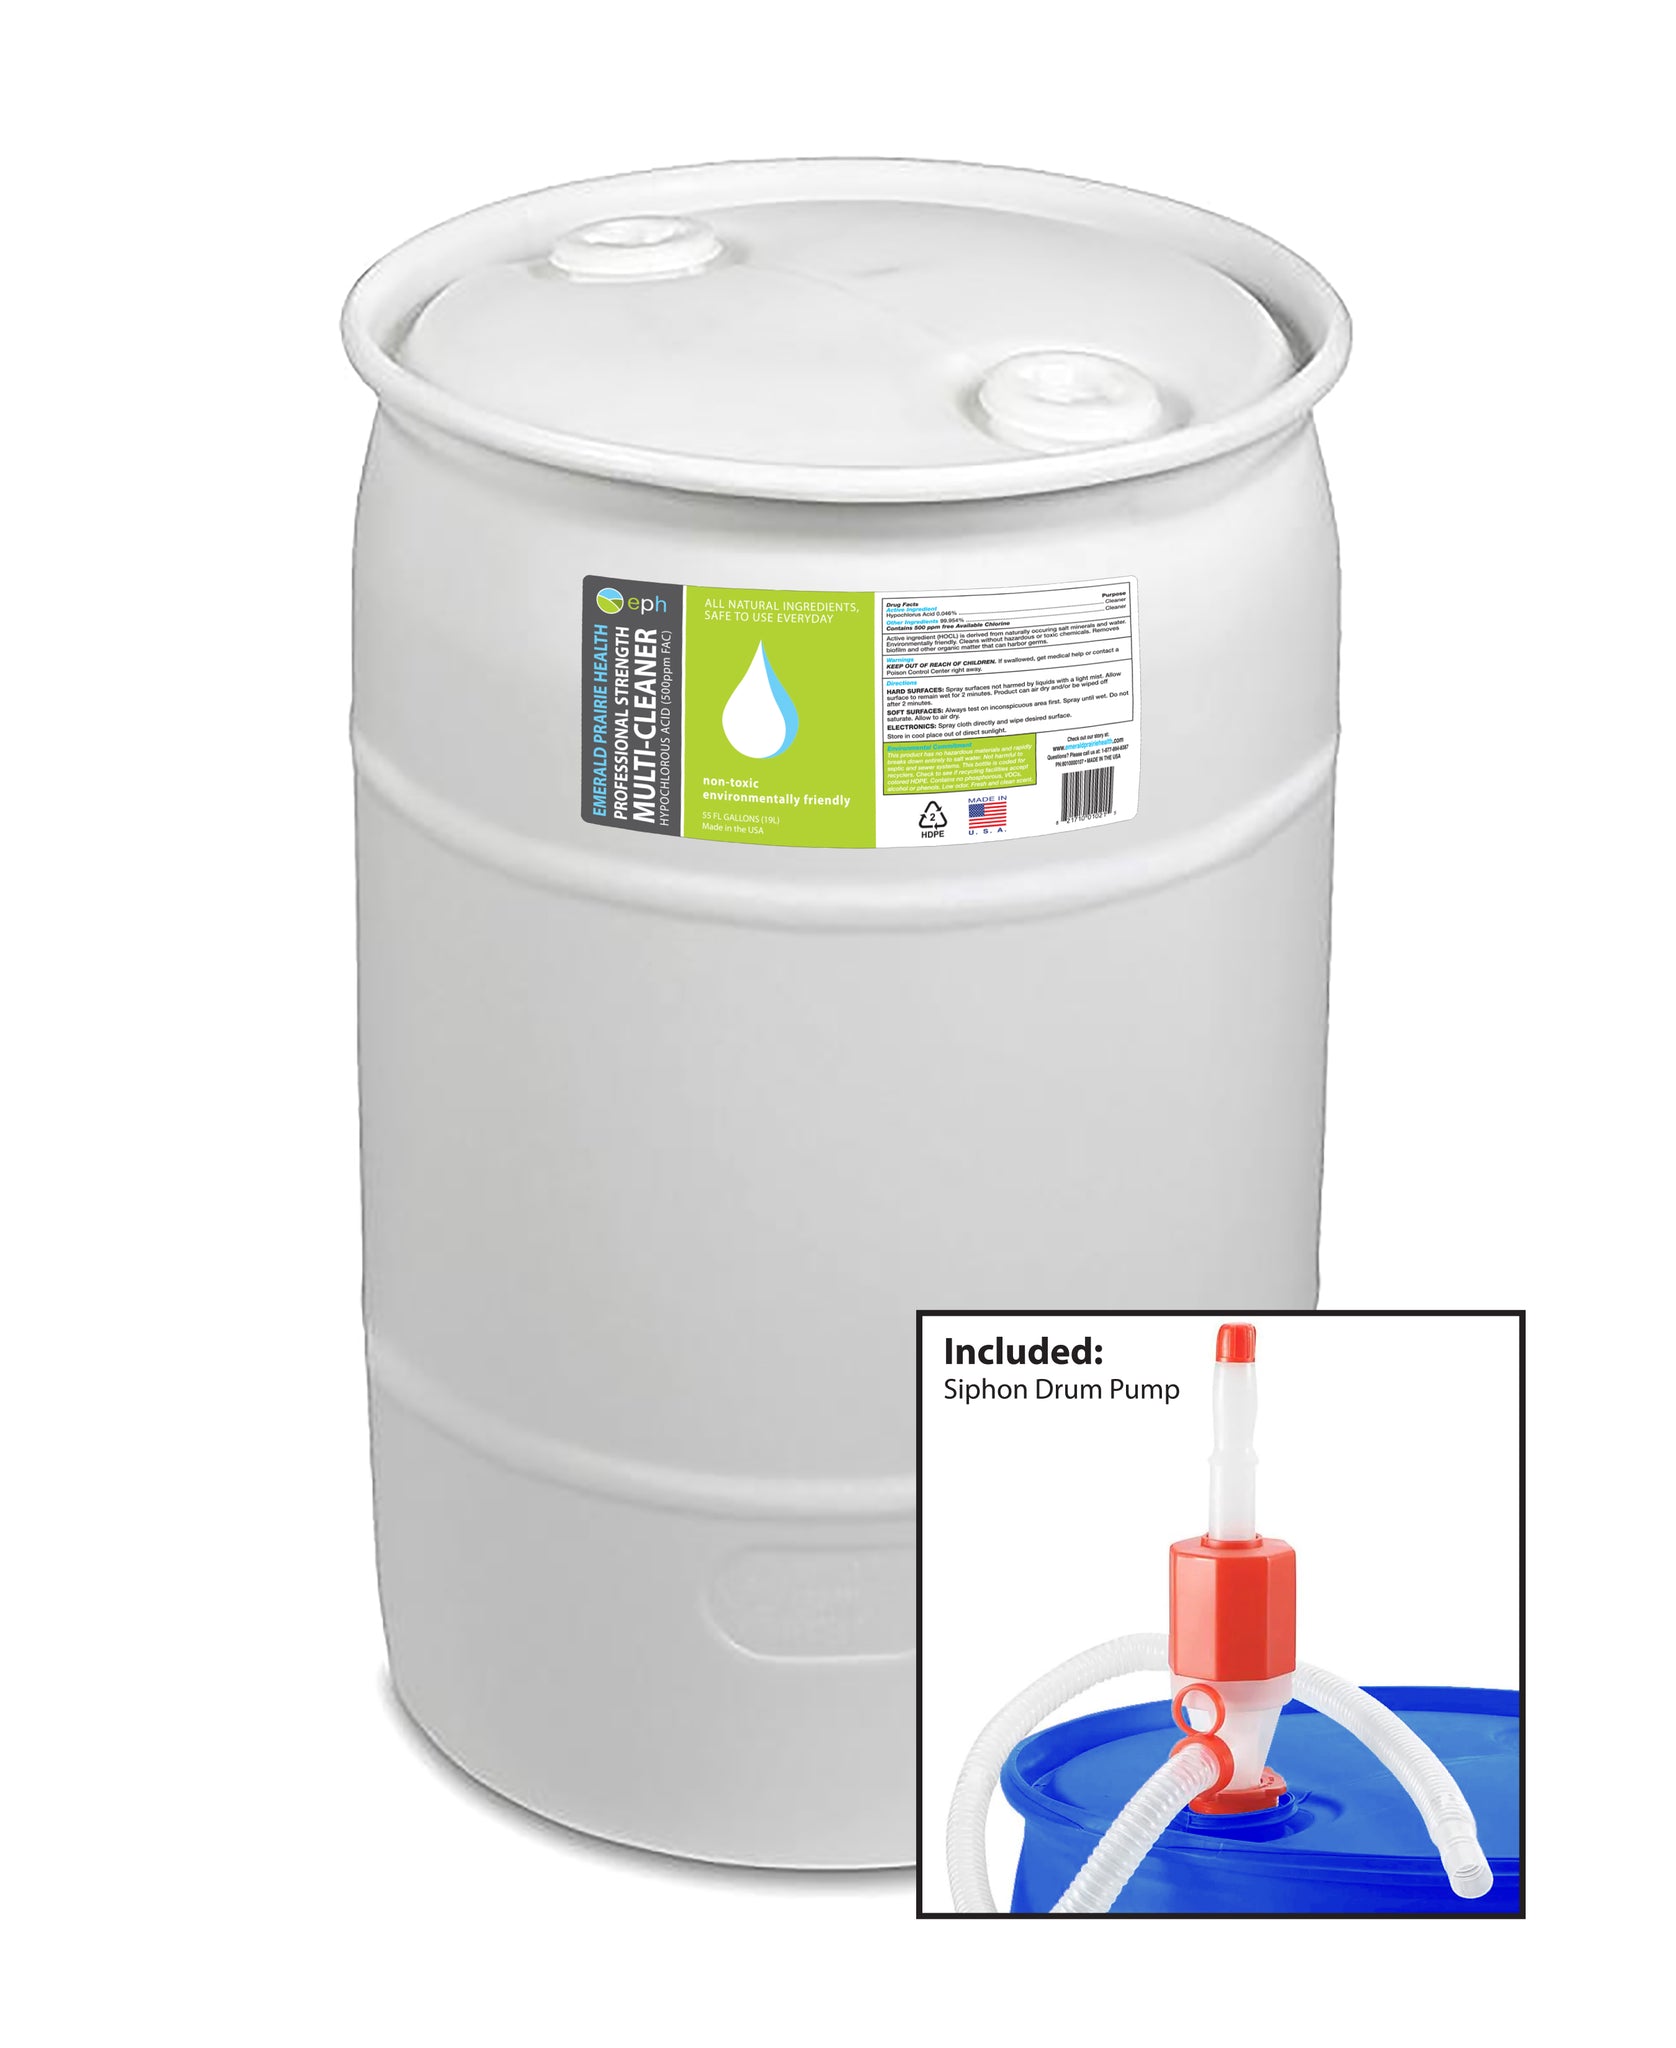 Emerald Prairie Health Professional Grade Surface Cleaner HOCl 500ppm - 55 Gallons With Pump